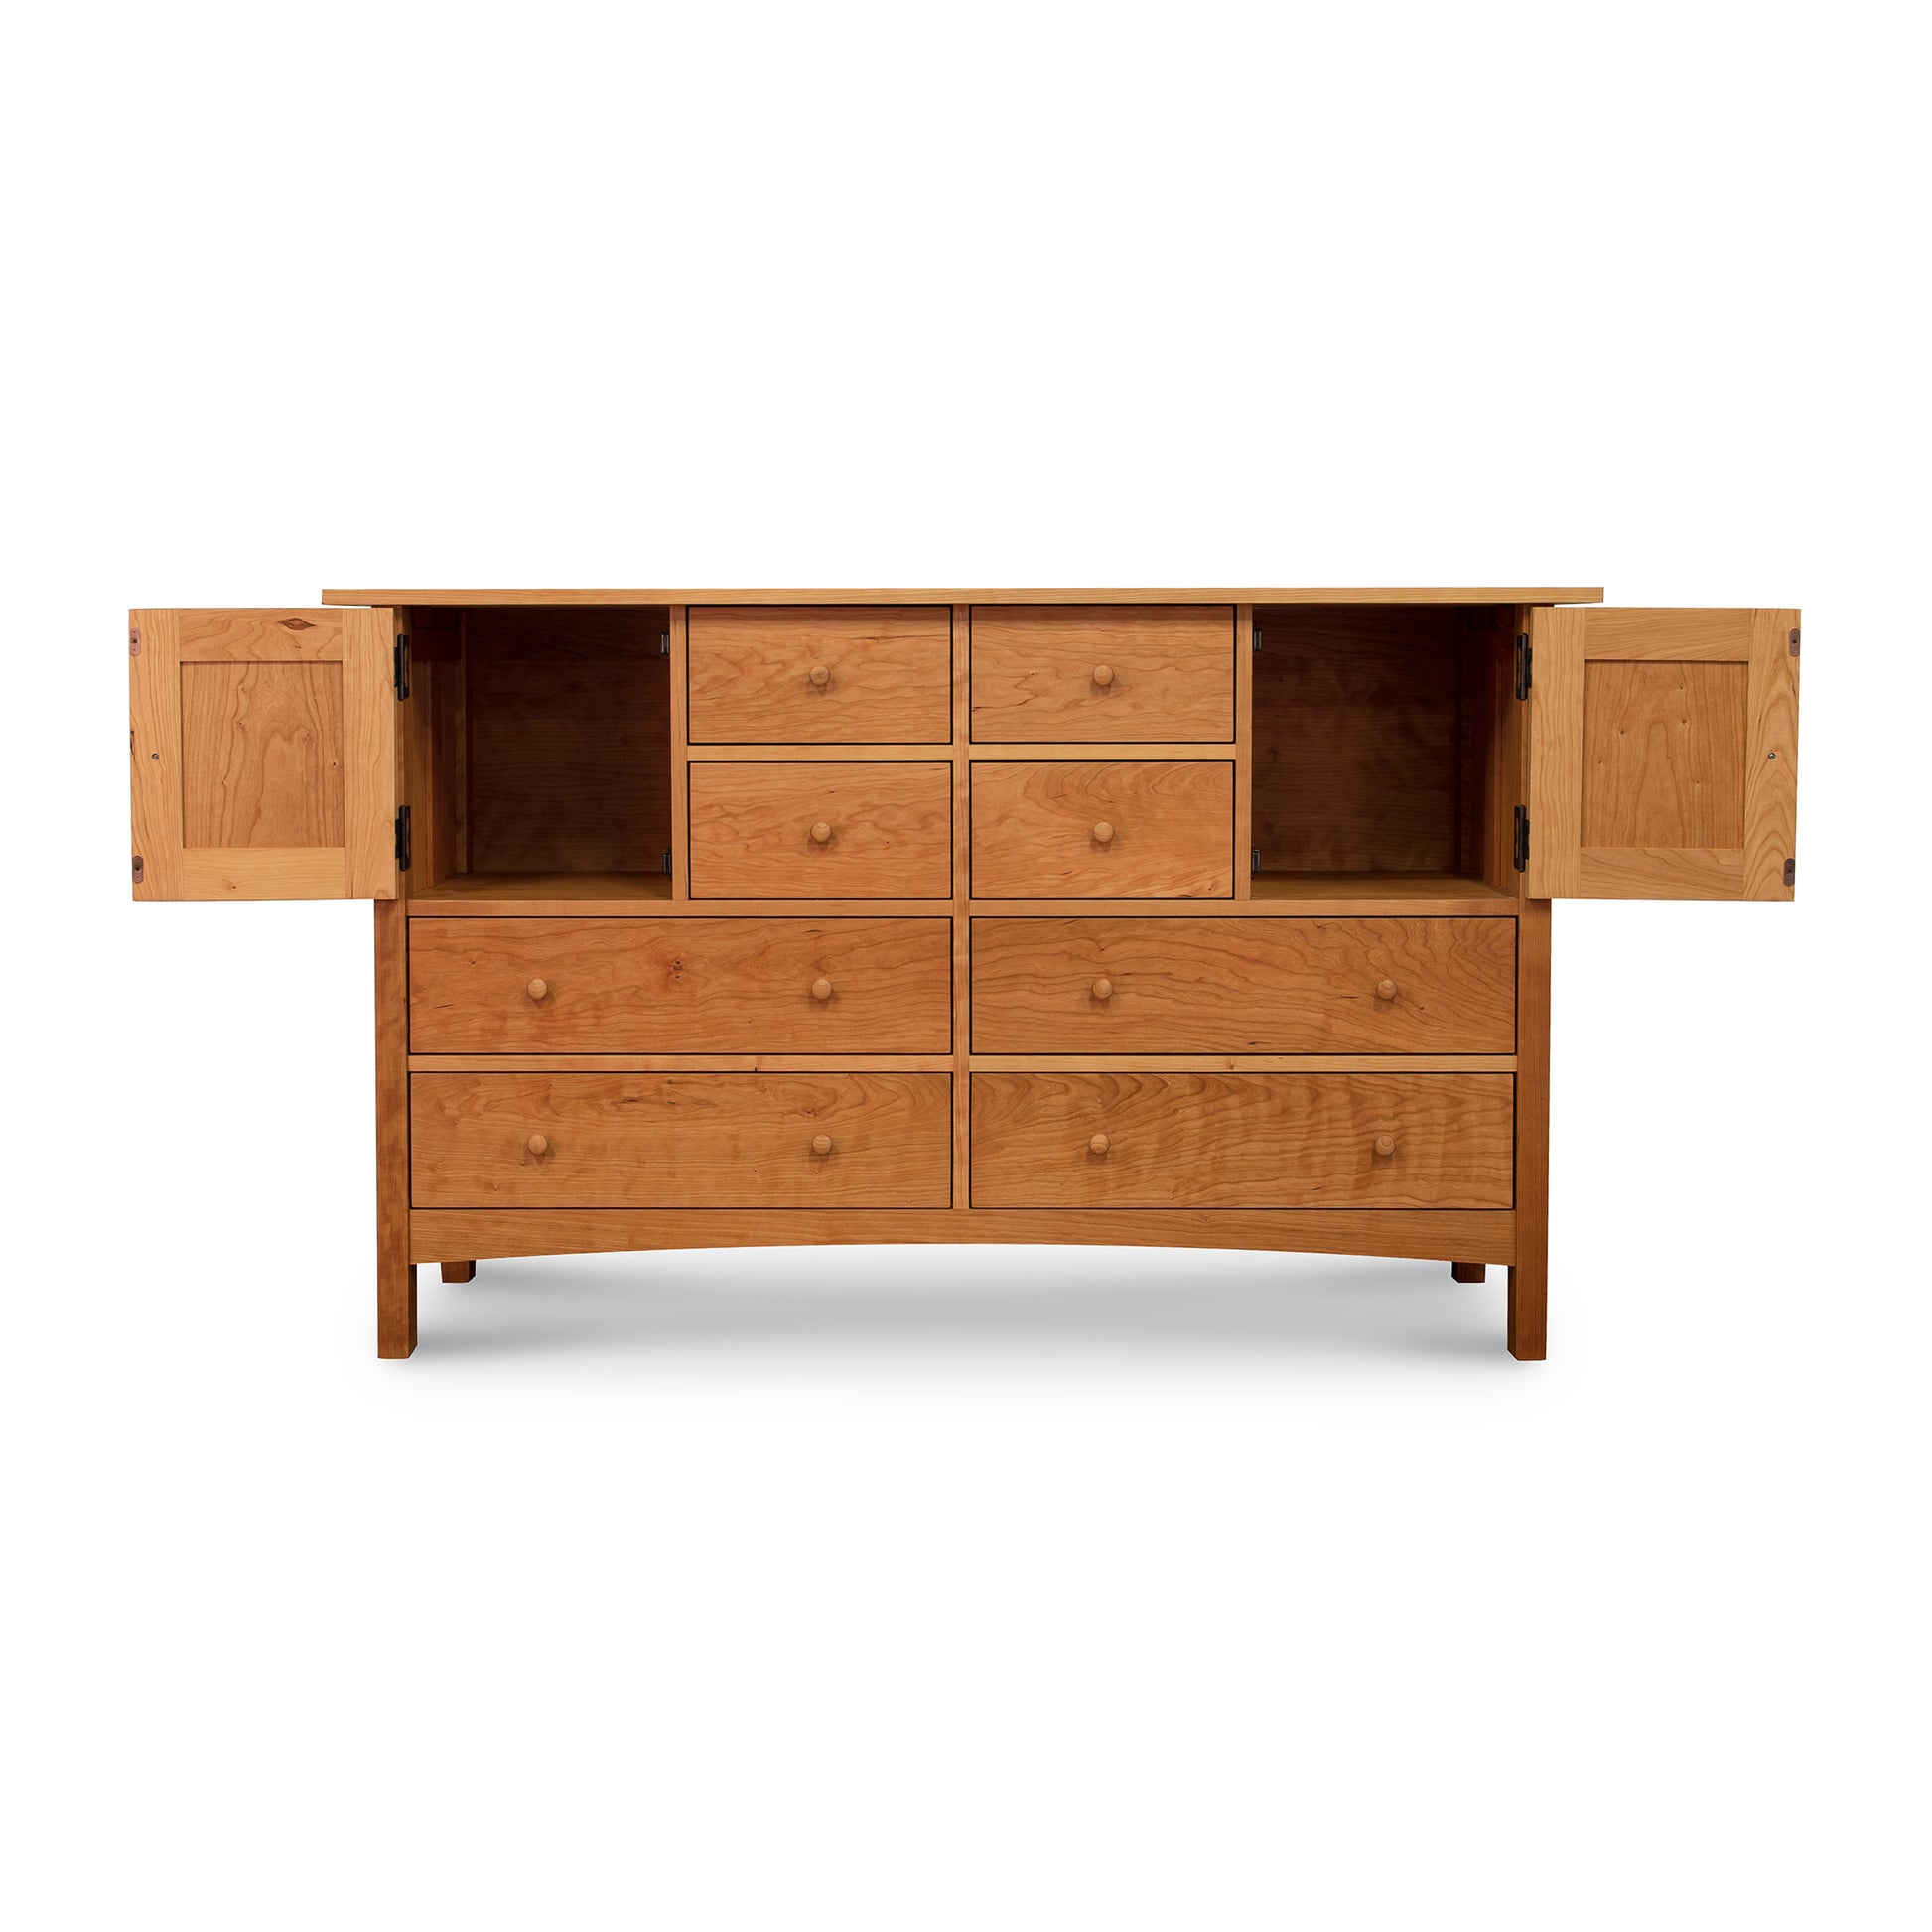 Vermont Furniture Designs Burlington Shaker 8-Drawer 2-Door Dresser with open drawers and cabinets against a white background.